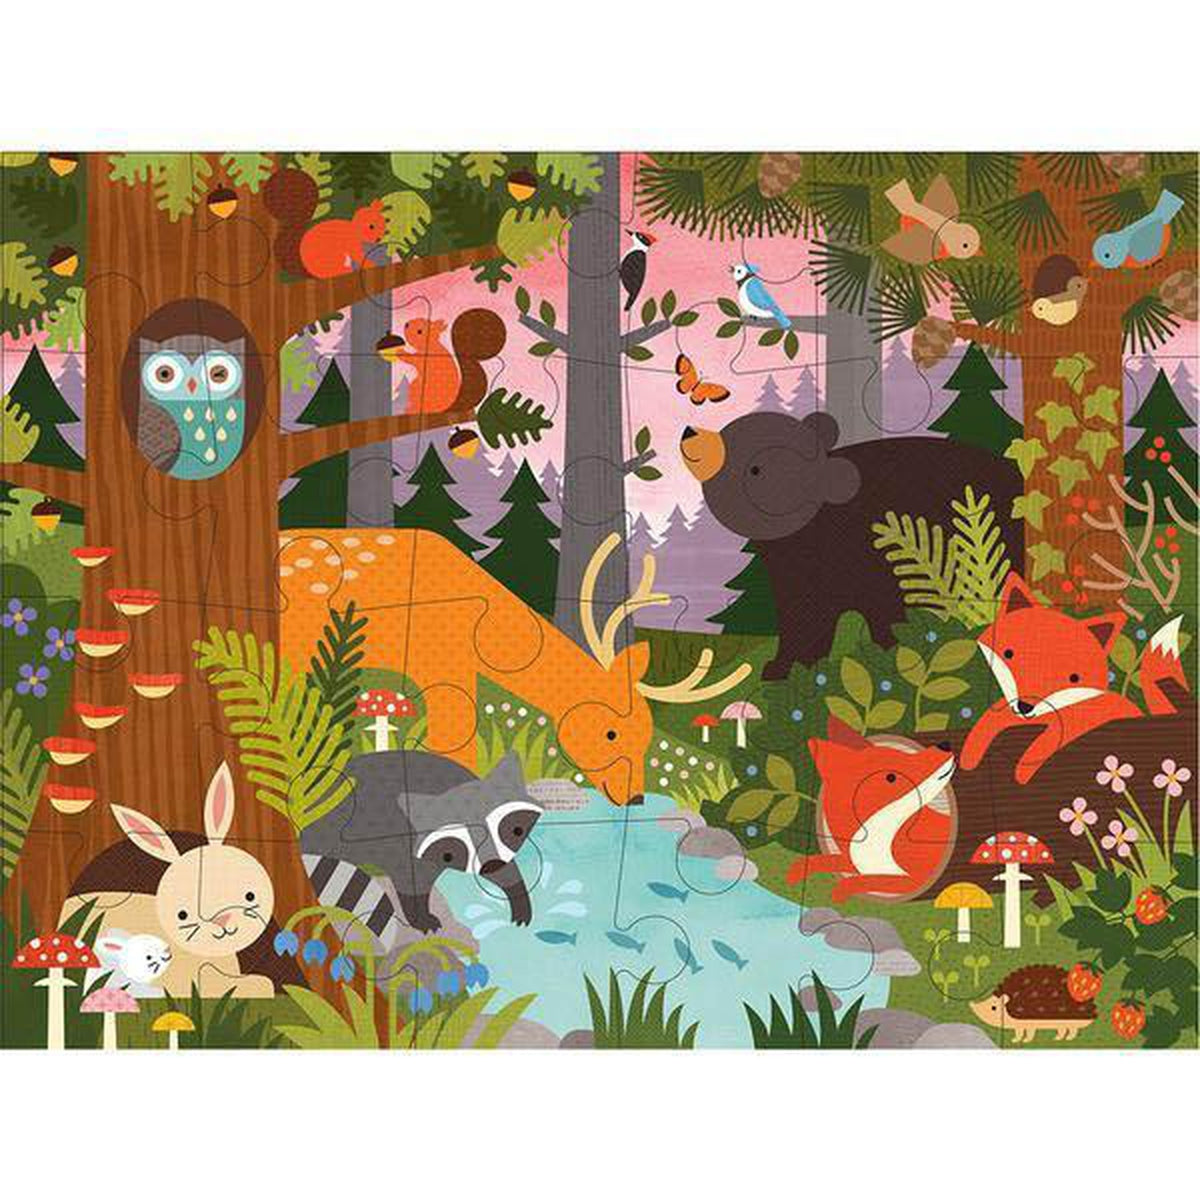 Petit Collage enchanted woodlands floor puzzle-puzzles-Petit Collage-Dilly Dally Kids